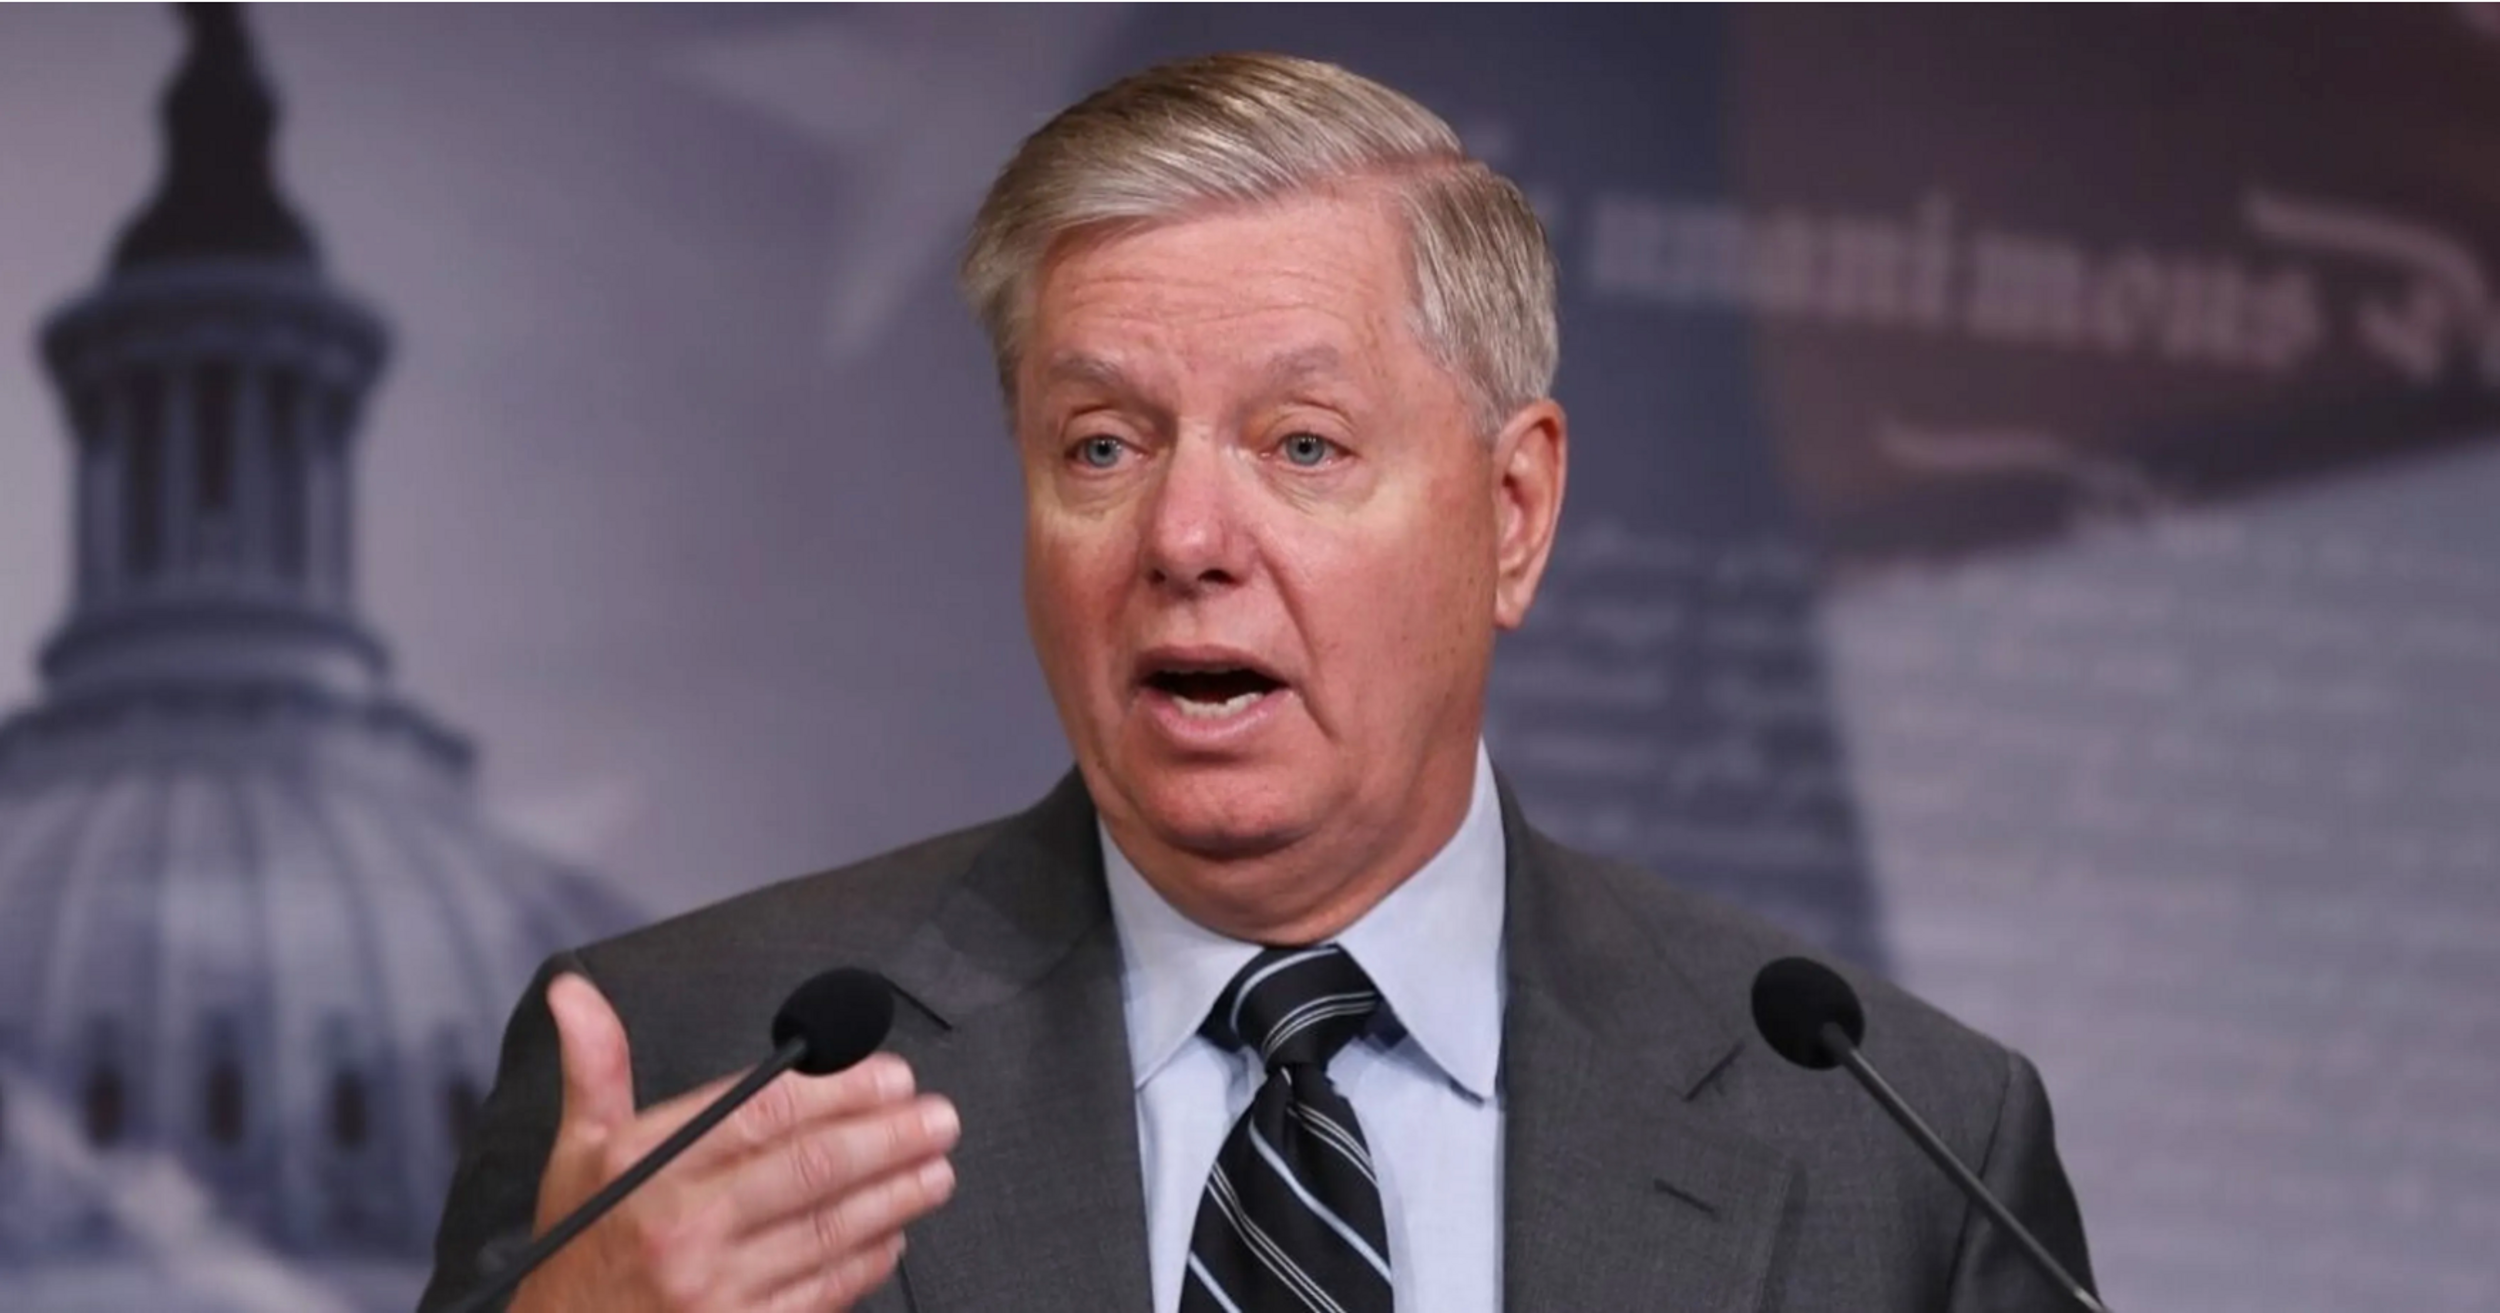 Lindsey Graham Praises Biden As 'The Best Person To Have' After Jan. 6 In Just Released Audio